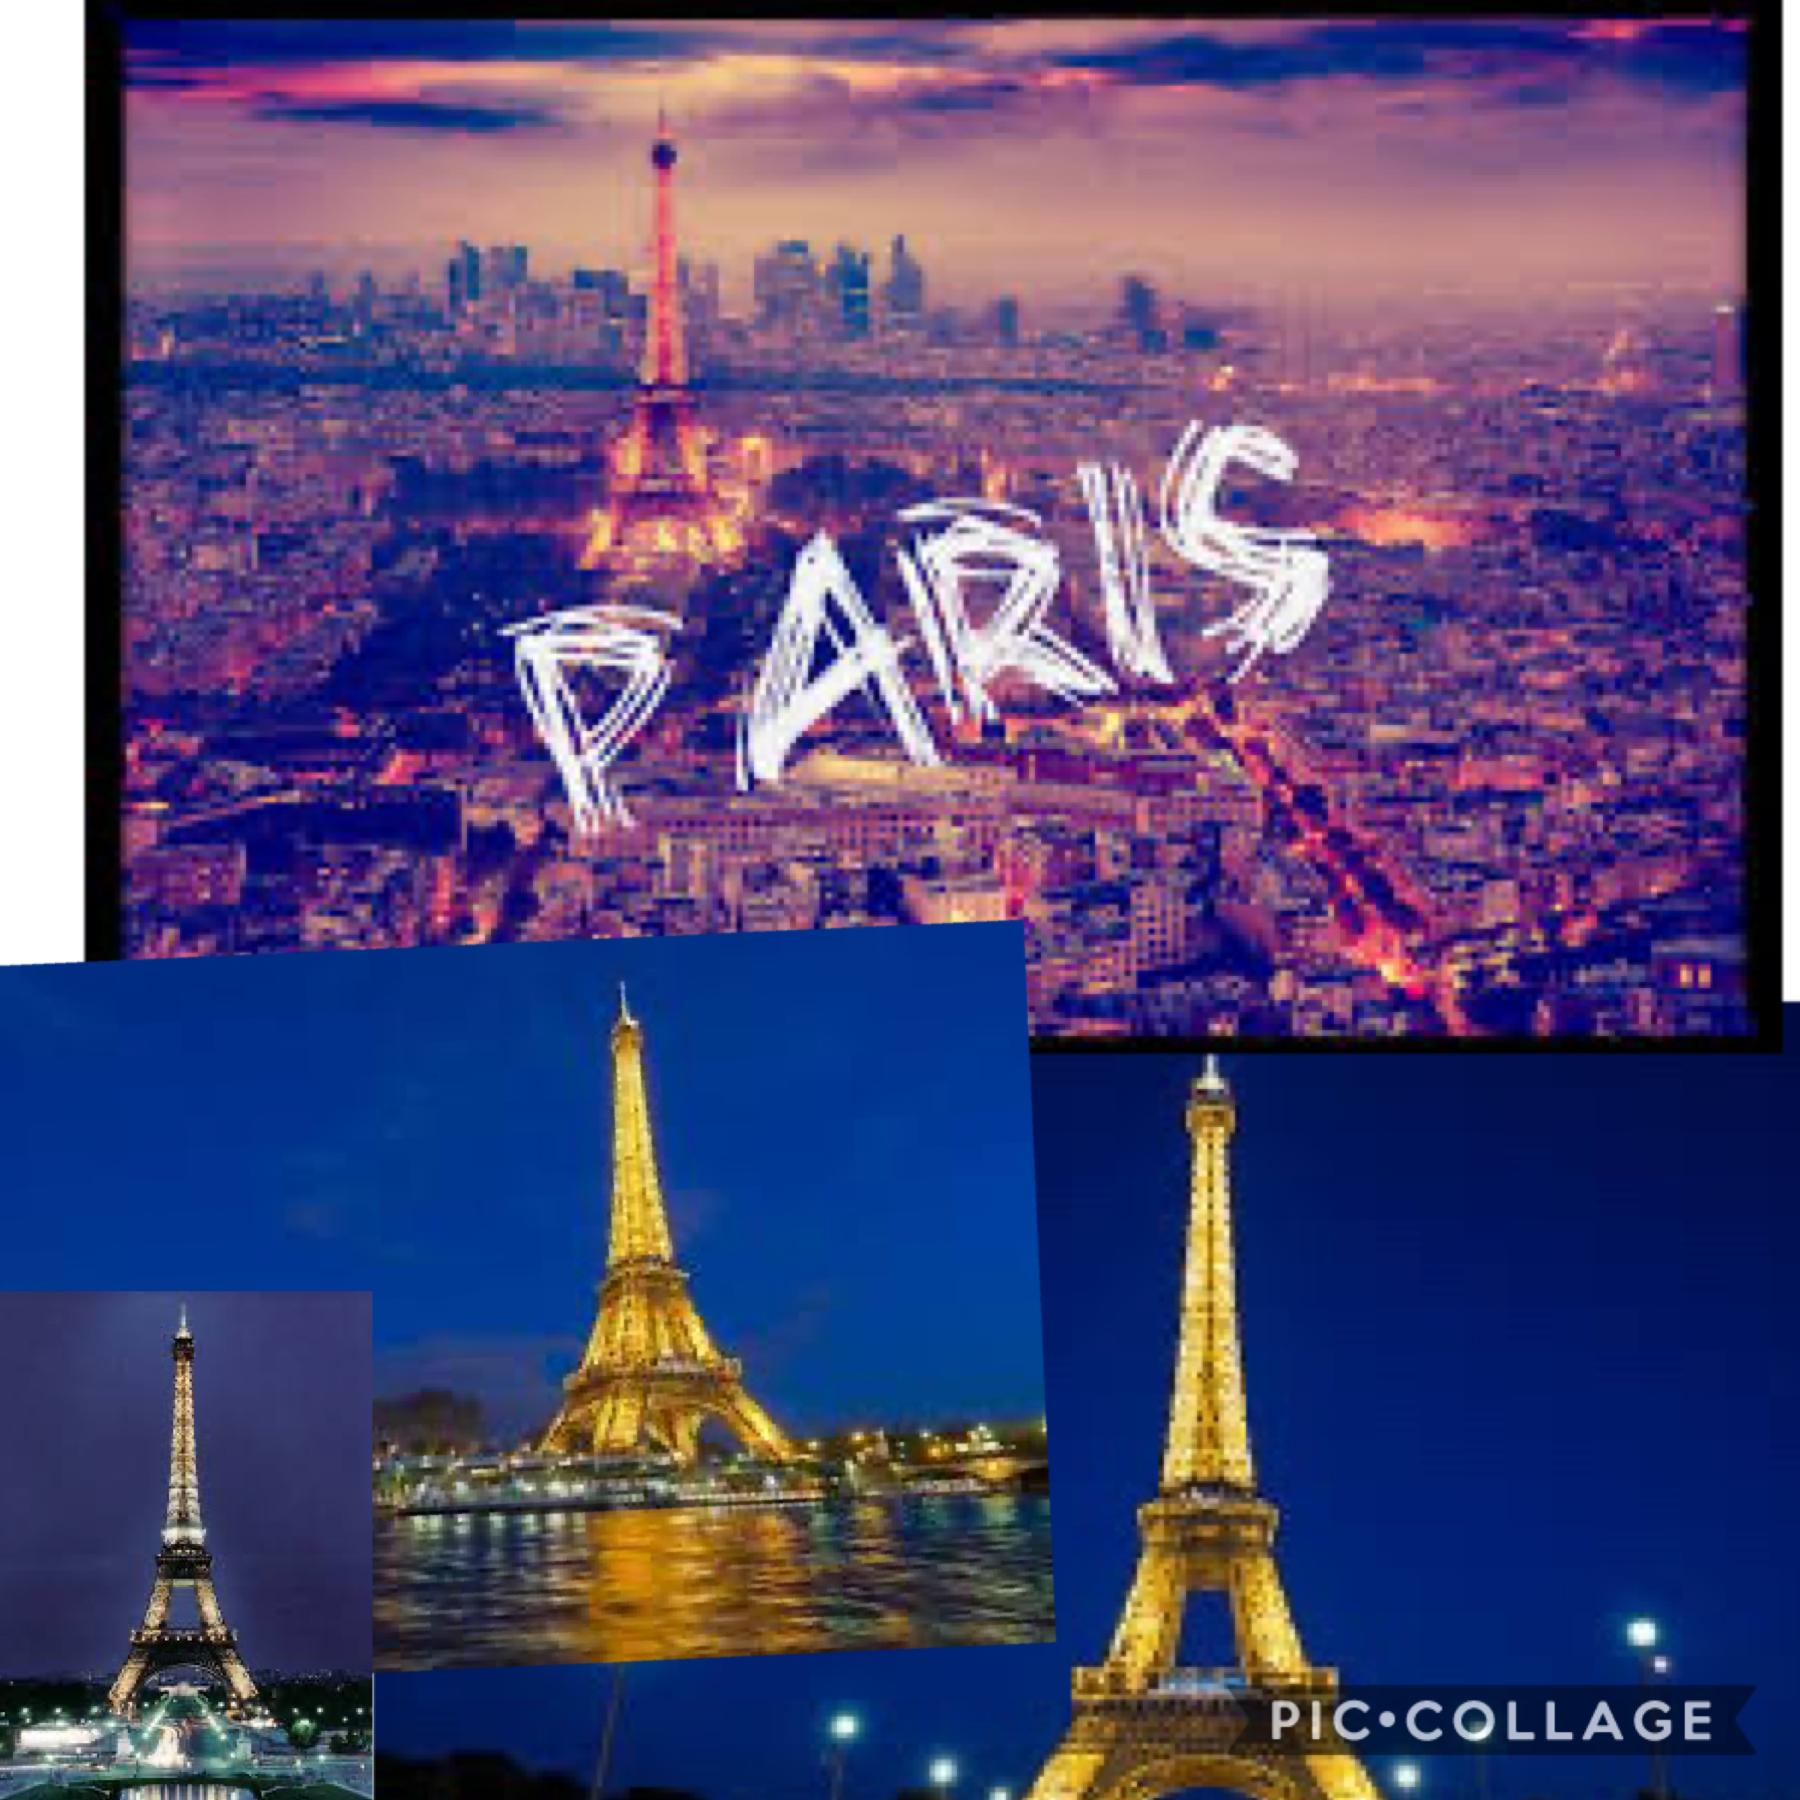 Have you all went to Paris???